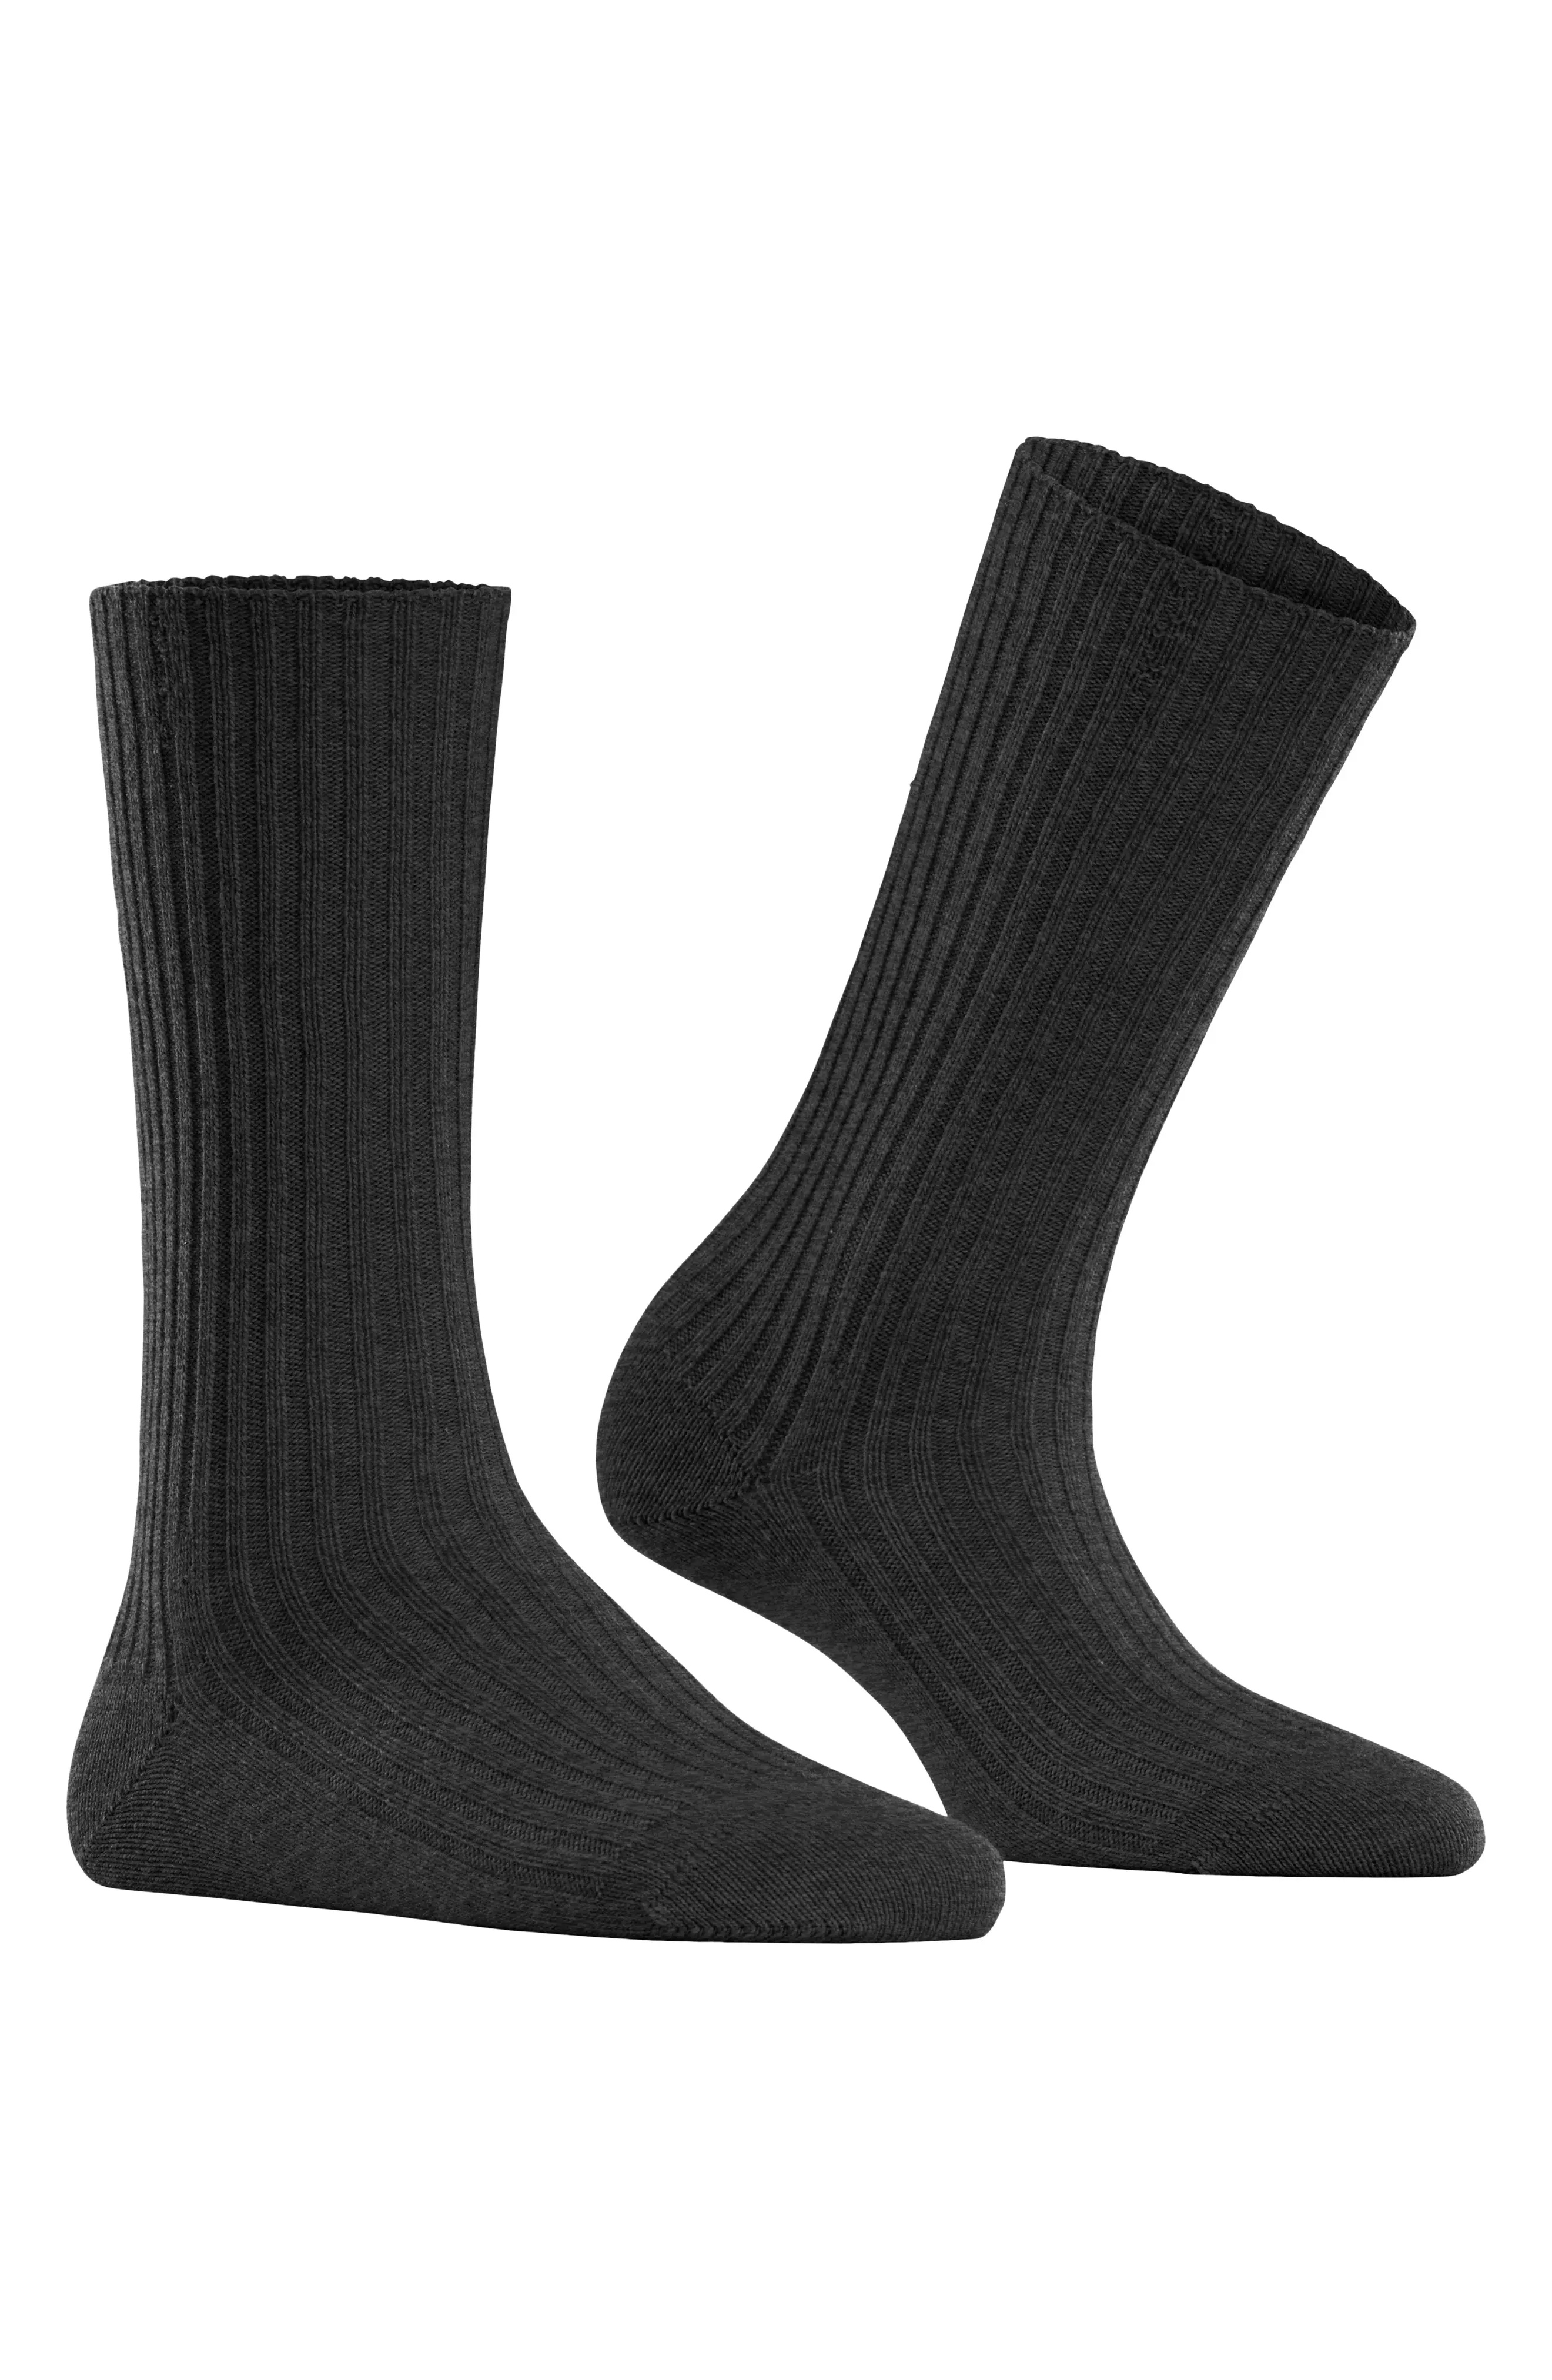 Cosy Wool Blend Boot Socks in Anthra. mel - 3